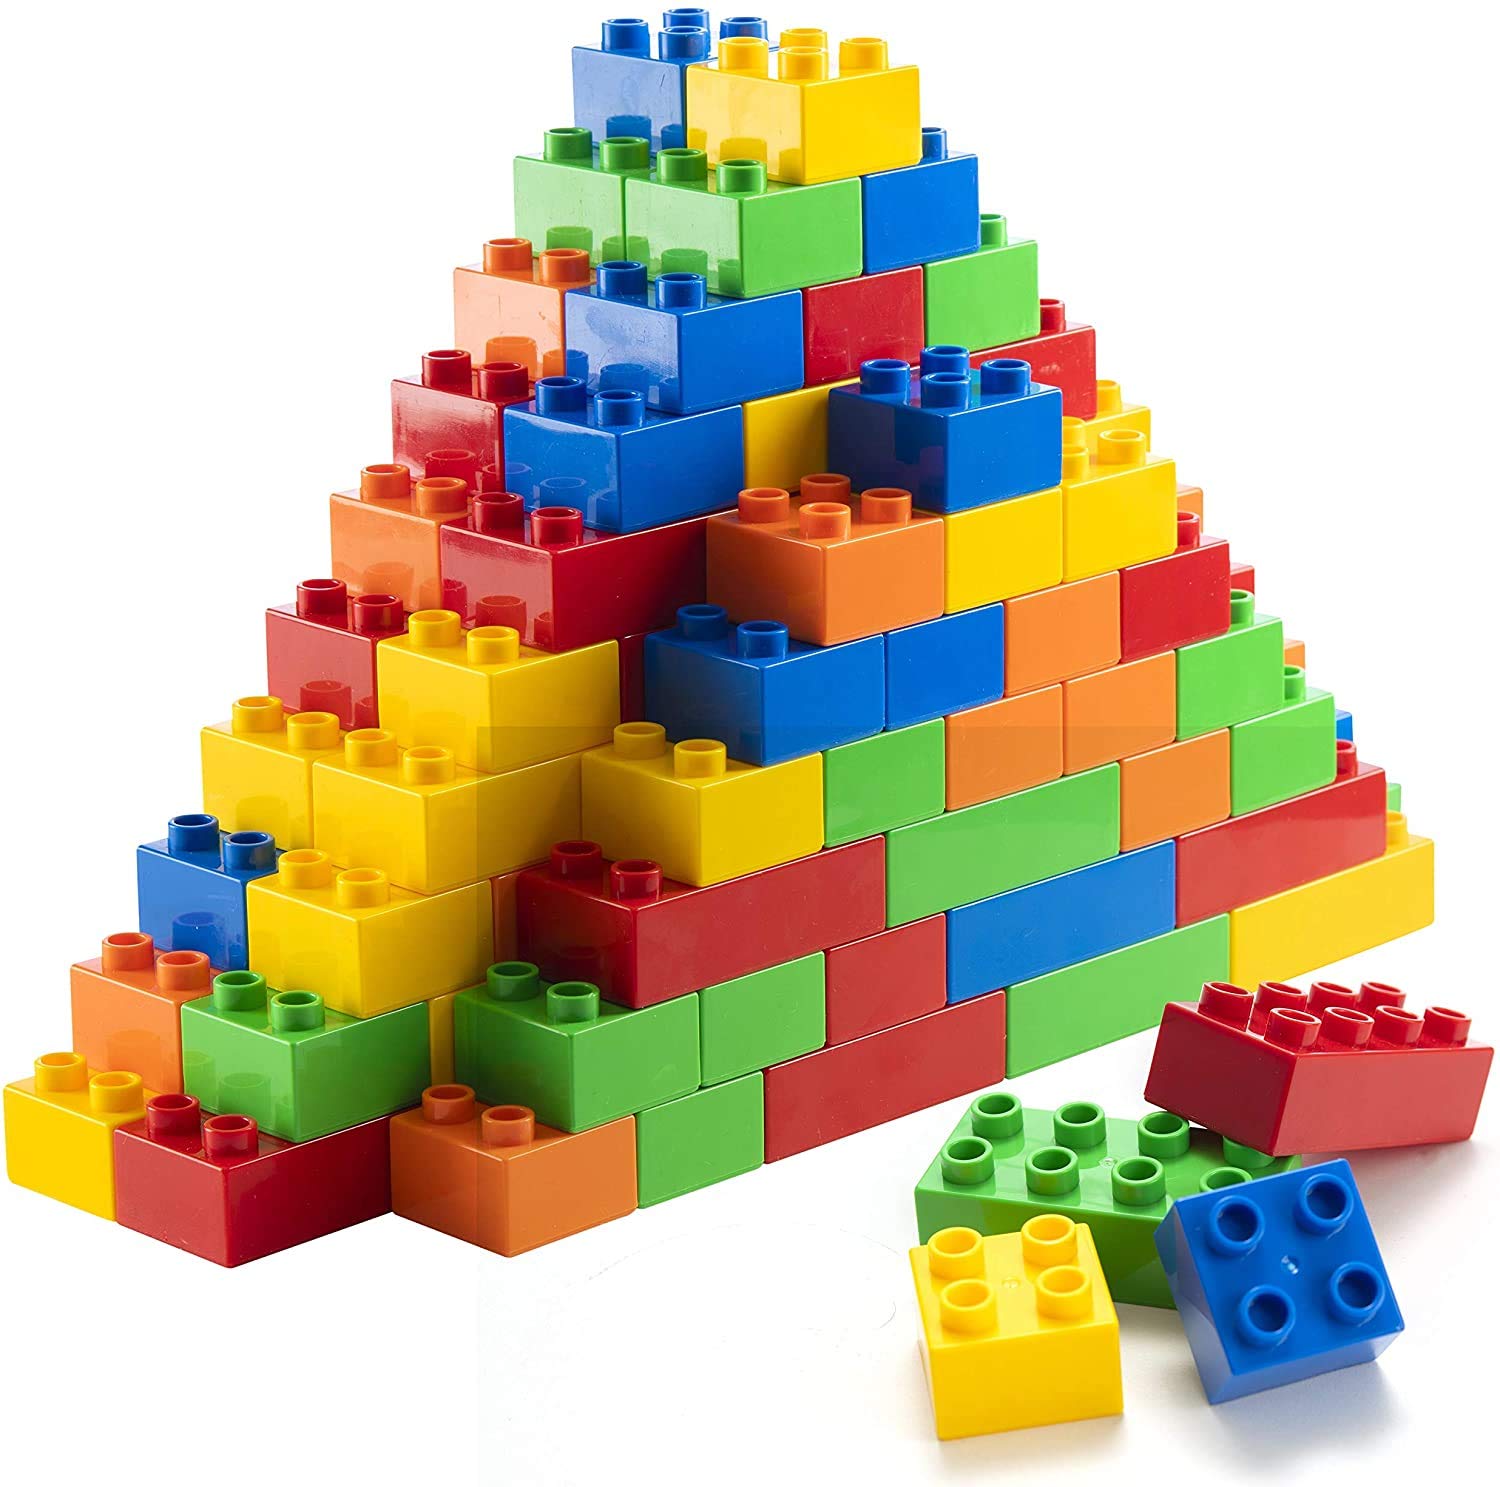 Prextex 150 Piece Classic Big Building Bricks | Large Toy Blocks | Compatible with Most Major Brands, STEM Toy Large Building Bricks Set for All Ages, Boys & Girls